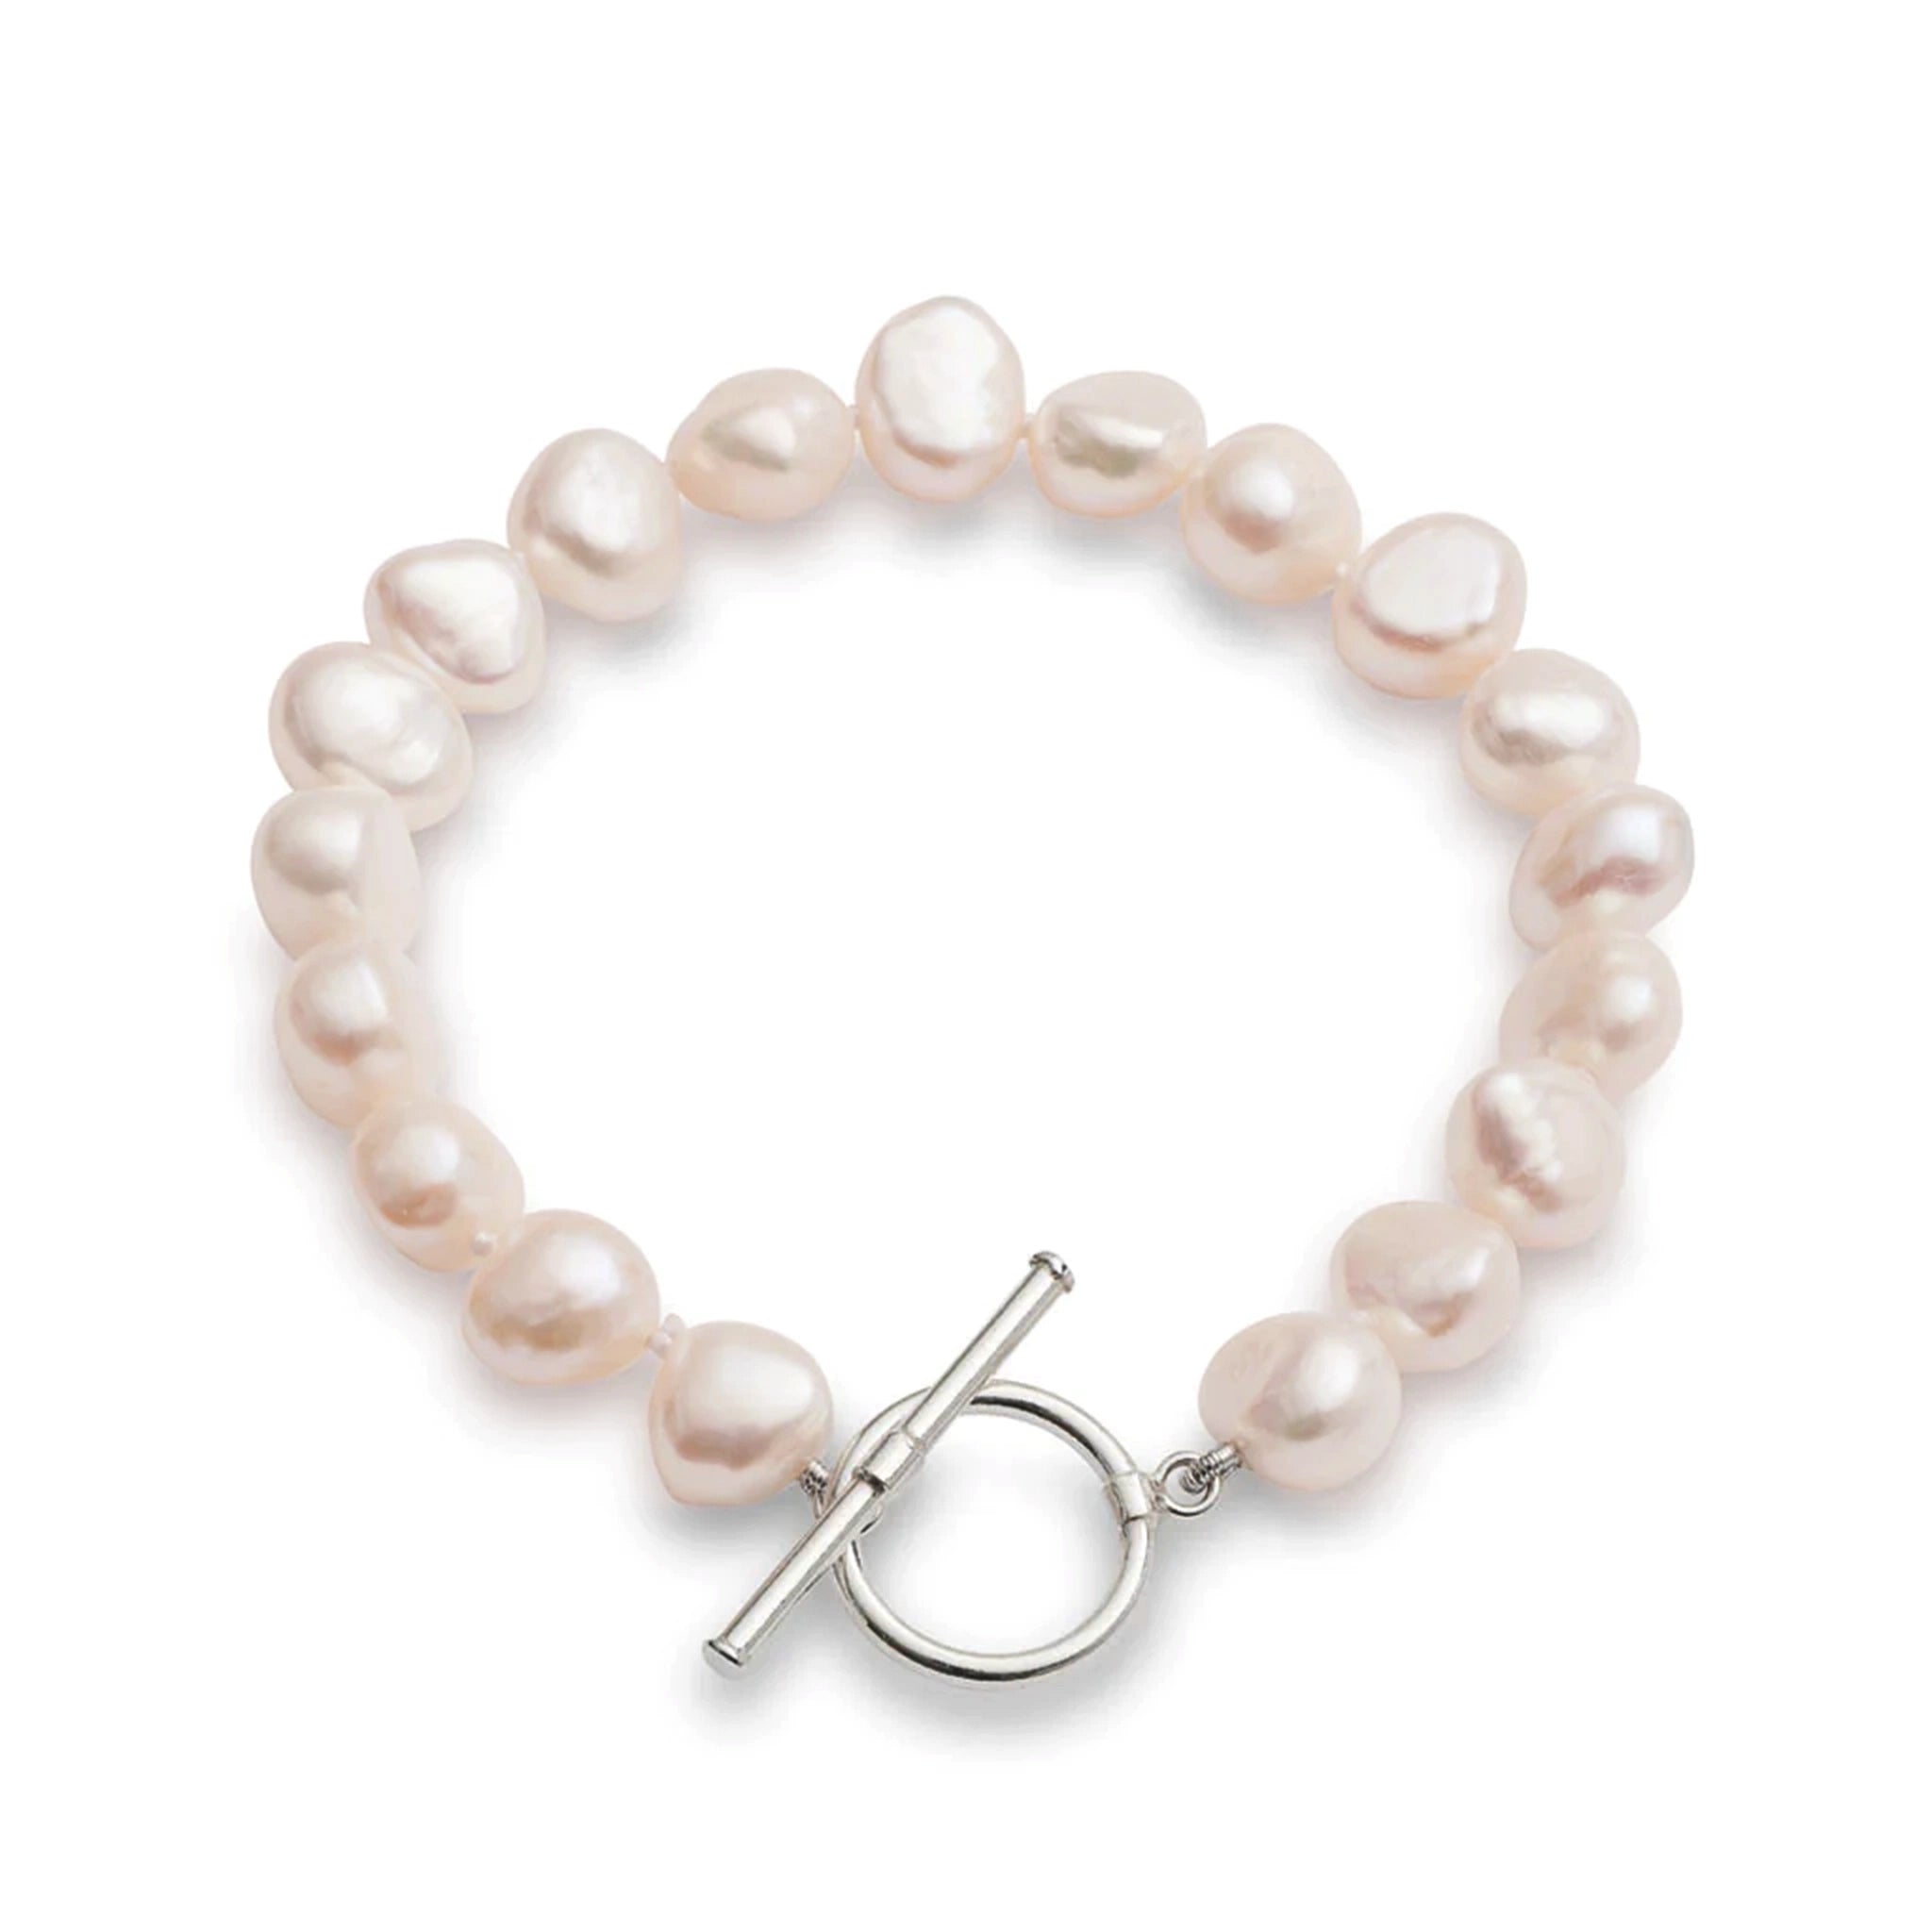 A silver toggle clasp bracelet strung with natural shaped pink freshwater pearls